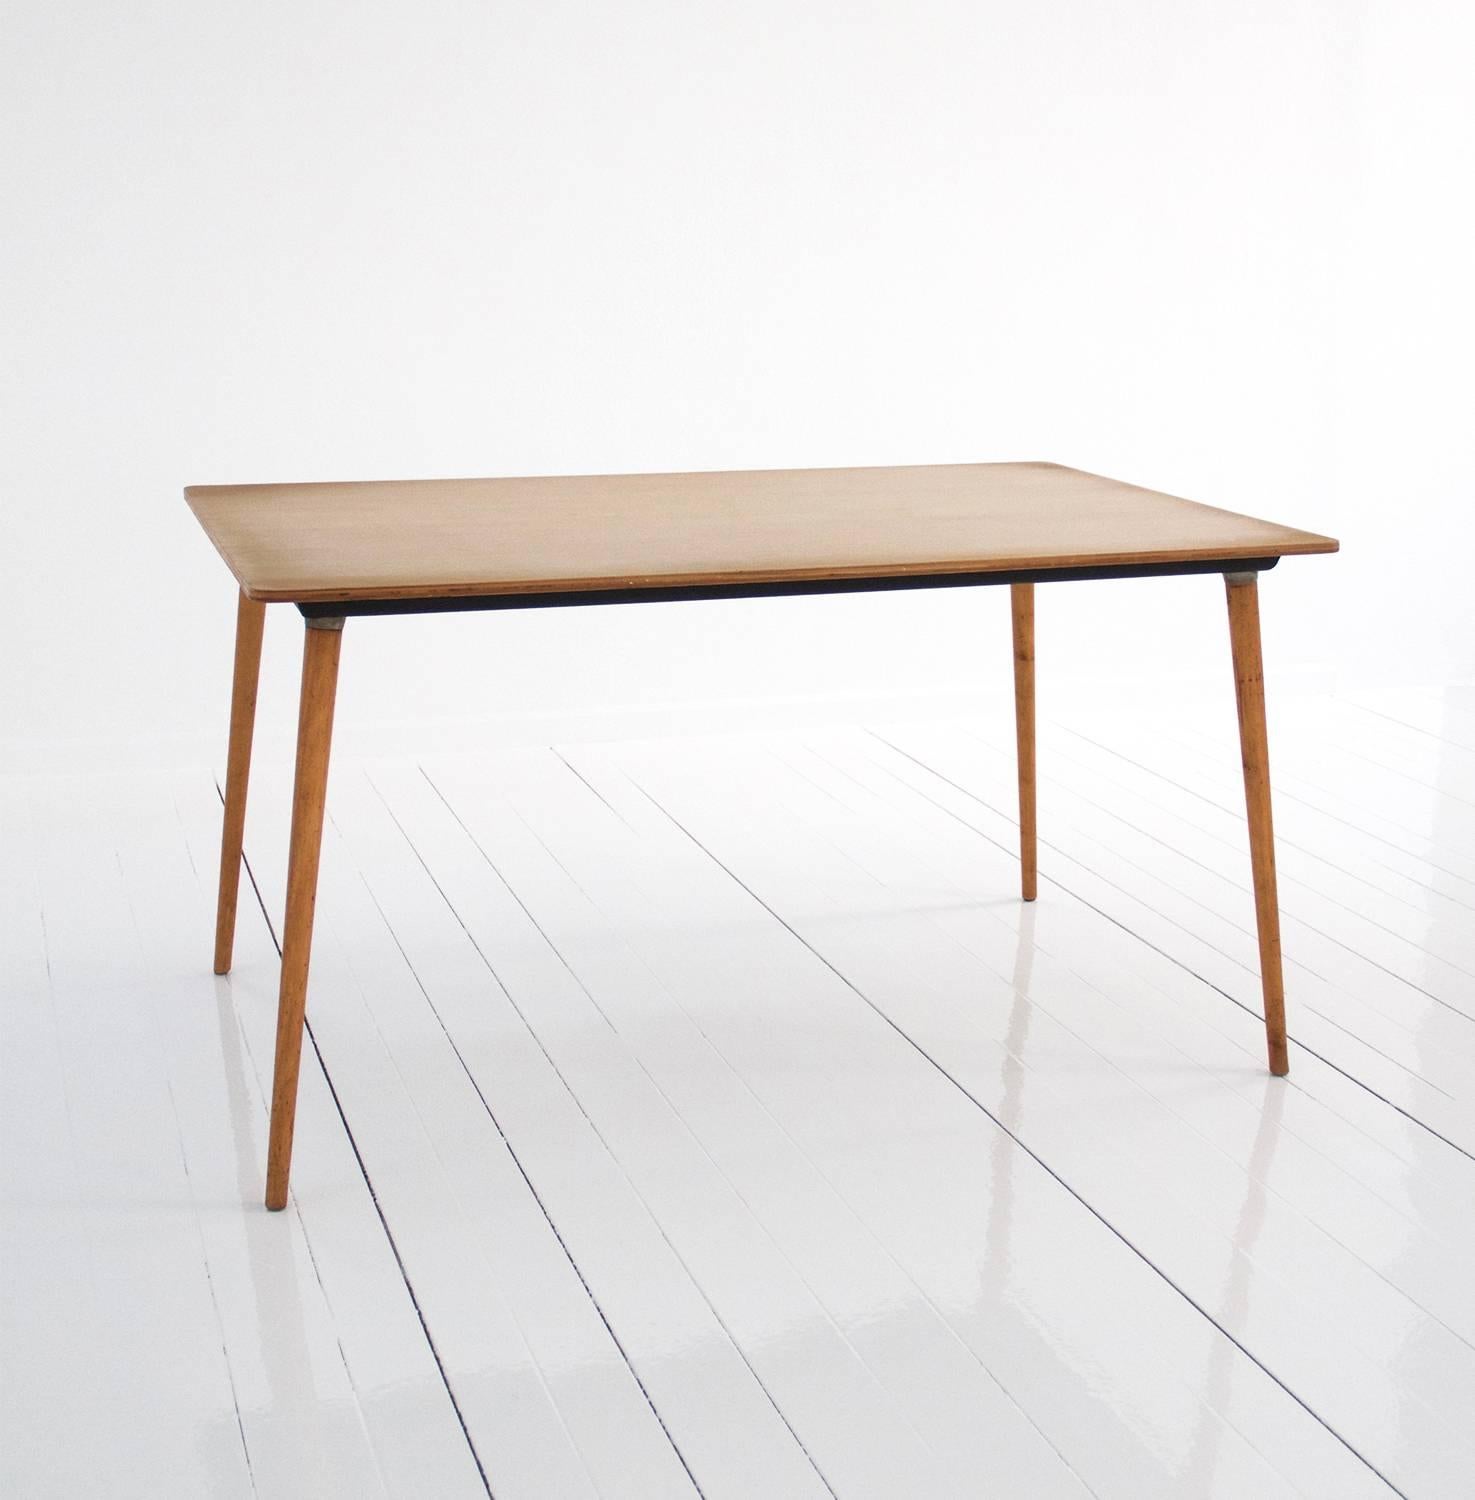 A special and rare table designed by Charles and Ray Eames. Made of birchwood with detachable solid dowel legs. Very good condition from early 1950s. 
Manufactured by Herman Miller. United States, circa 1940.